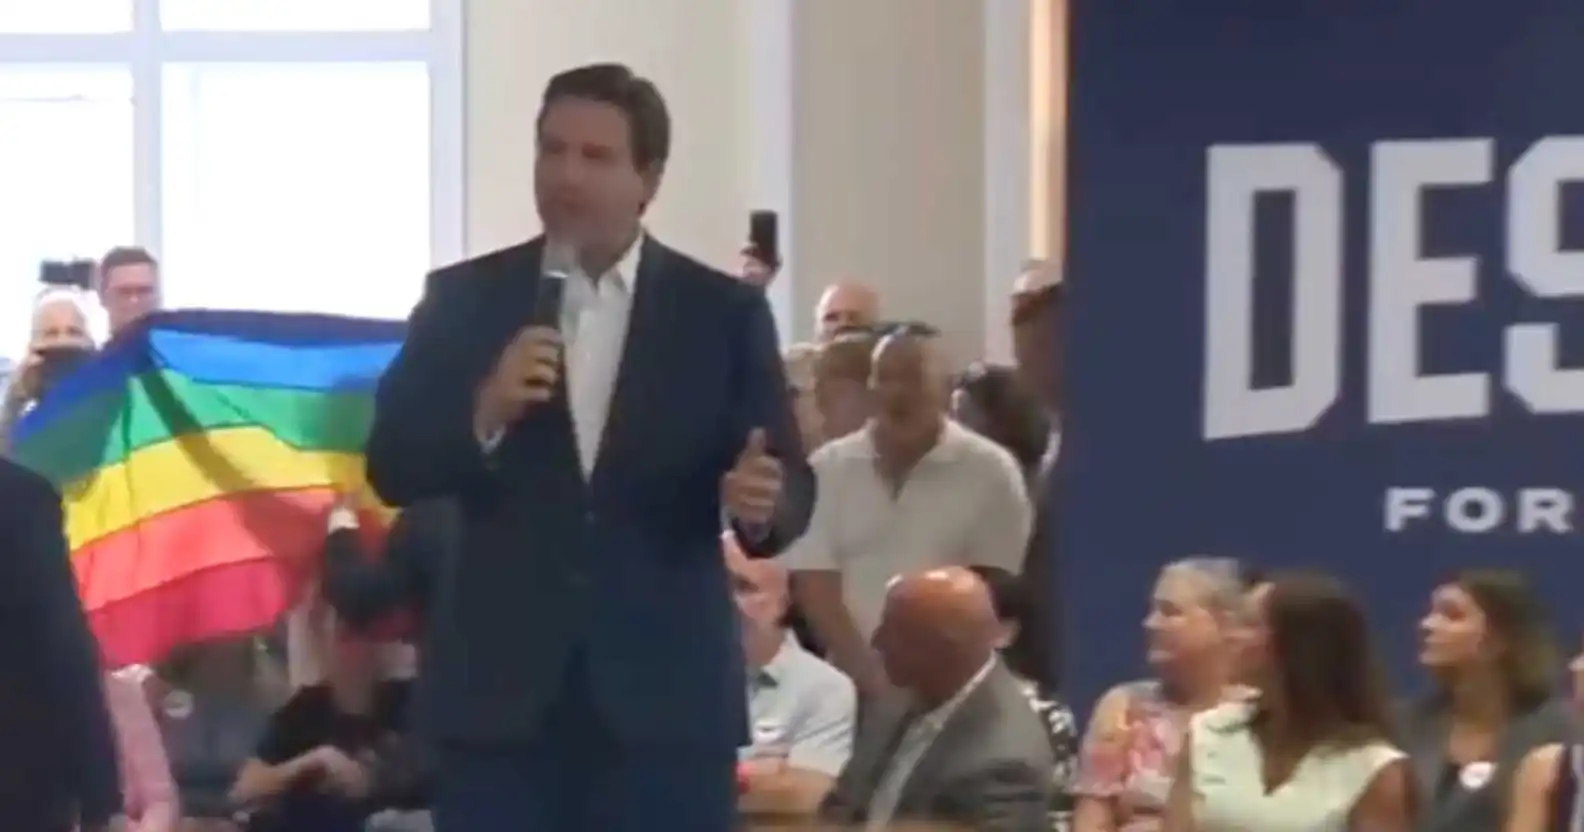 Ron DeSantis rants about ‘indoctrinating children’ after seeing one single Pride flag